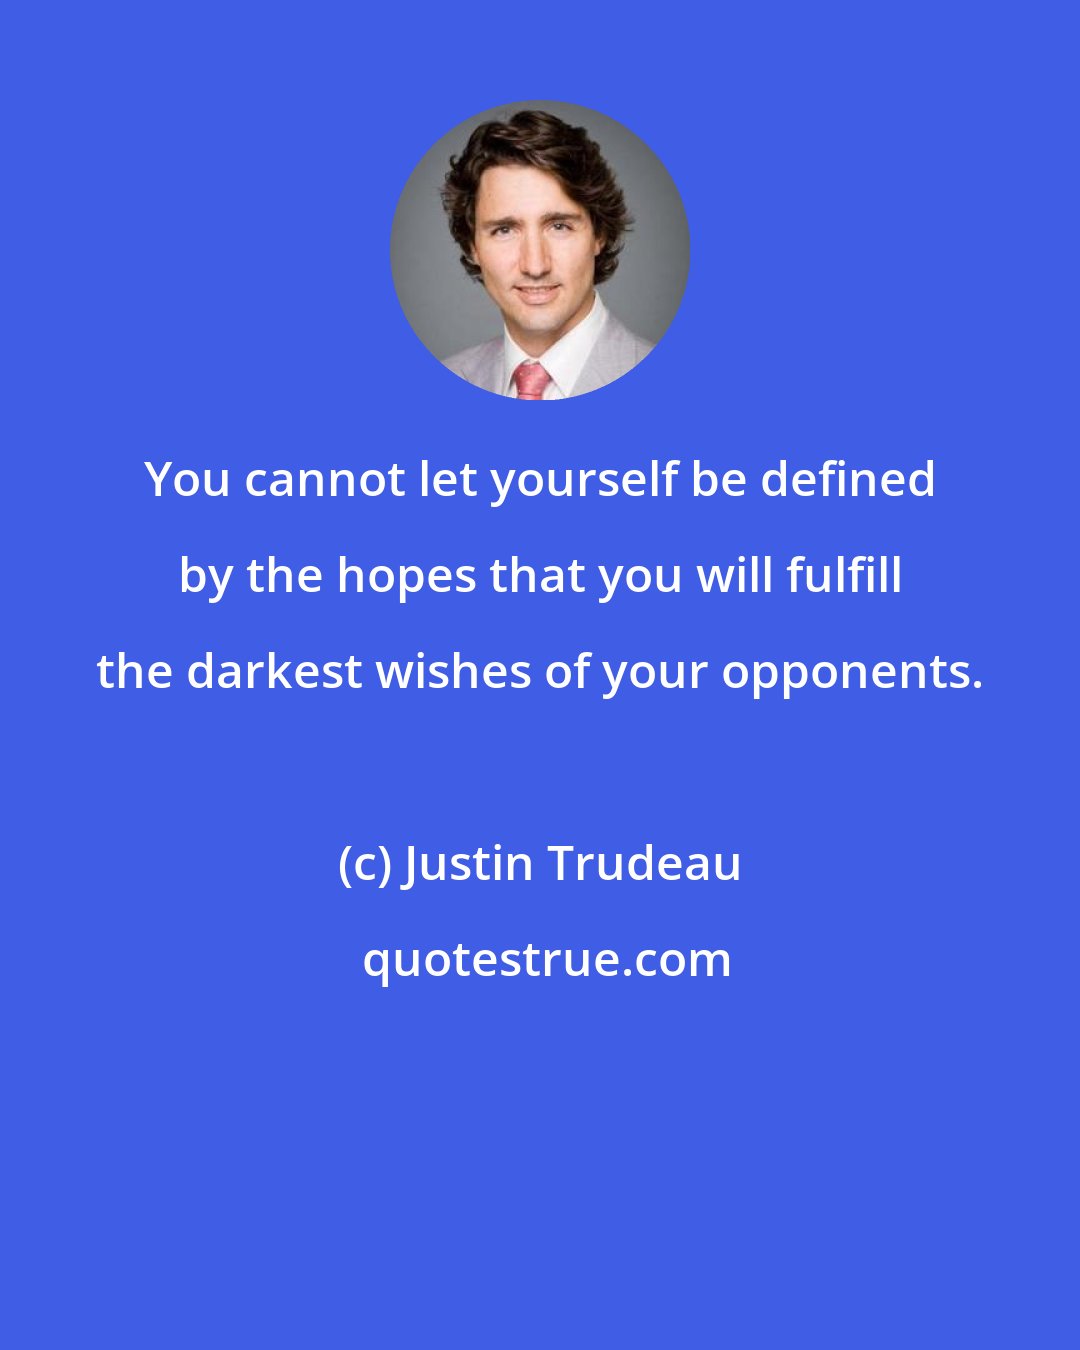 Justin Trudeau: You cannot let yourself be defined by the hopes that you will fulfill the darkest wishes of your opponents.